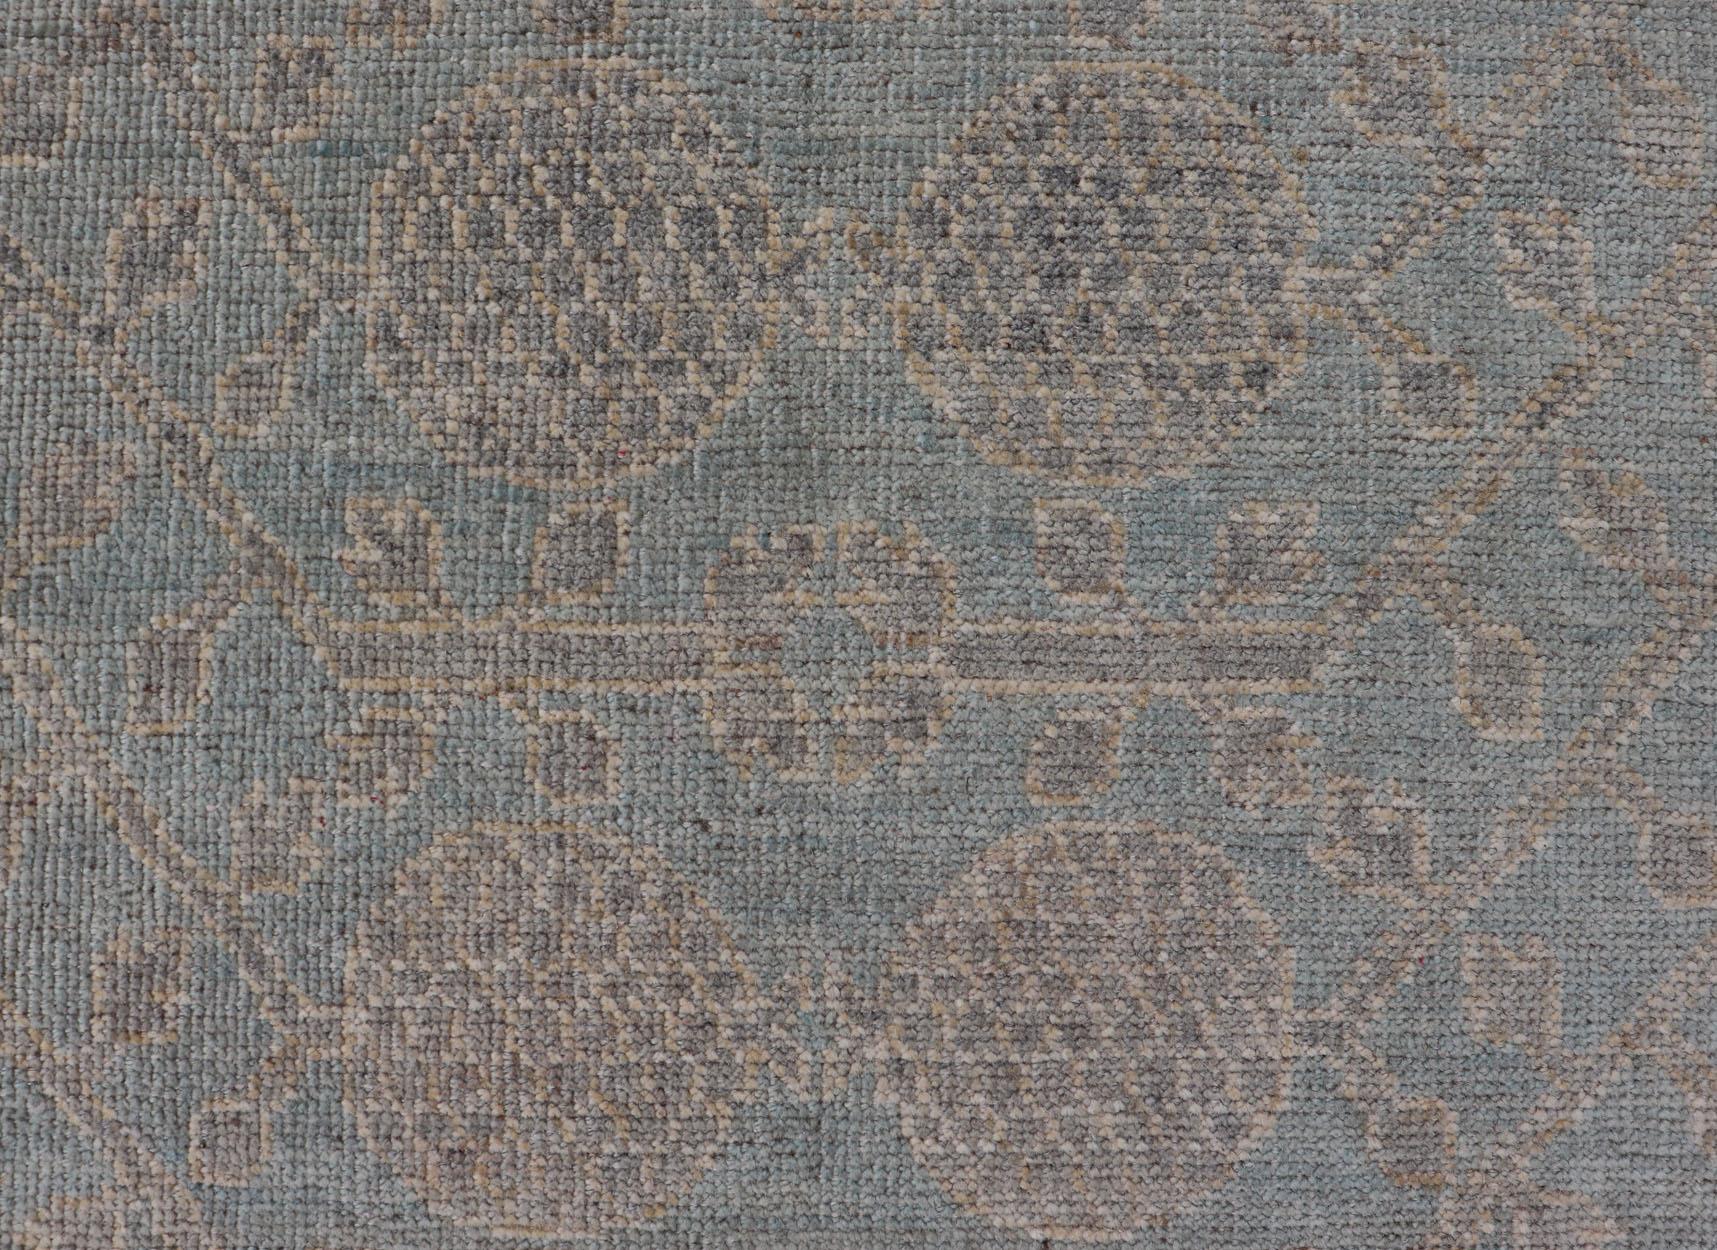 Afghan Khotan Rug with Geometric Design in Shades of Light Blue and Taupe In Good Condition For Sale In Atlanta, GA